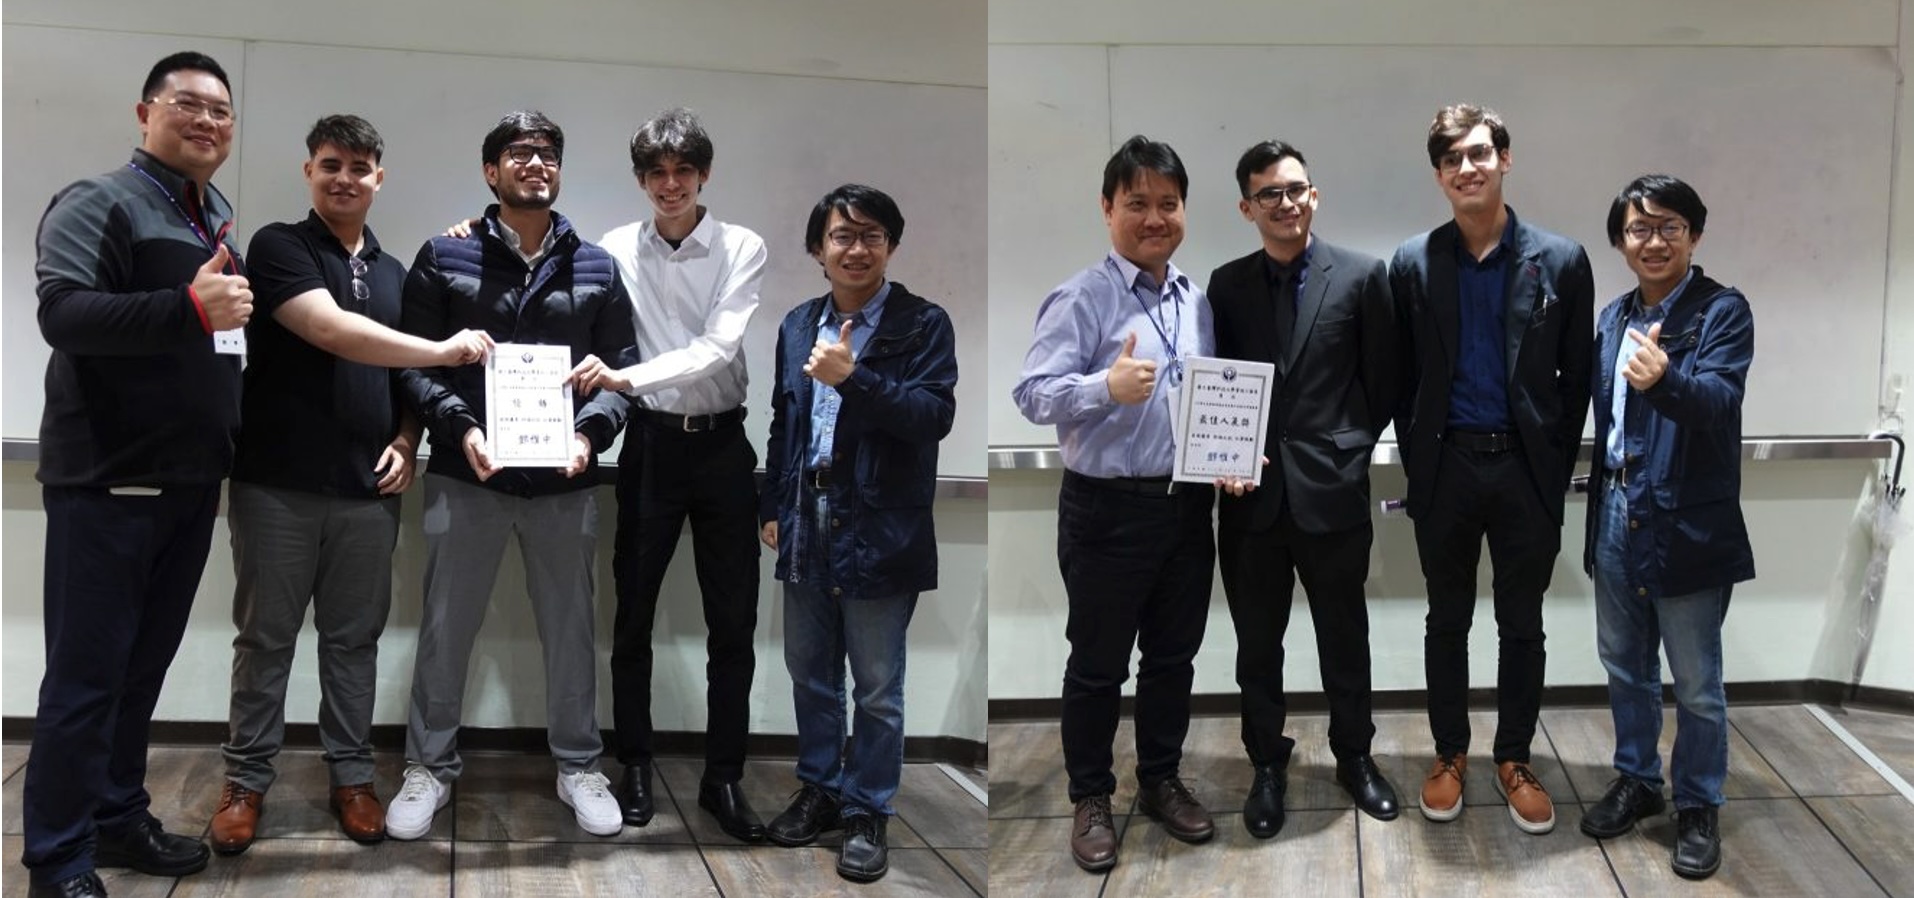 Our team members from UPTP get best and most popularity awards from their capstone project competition